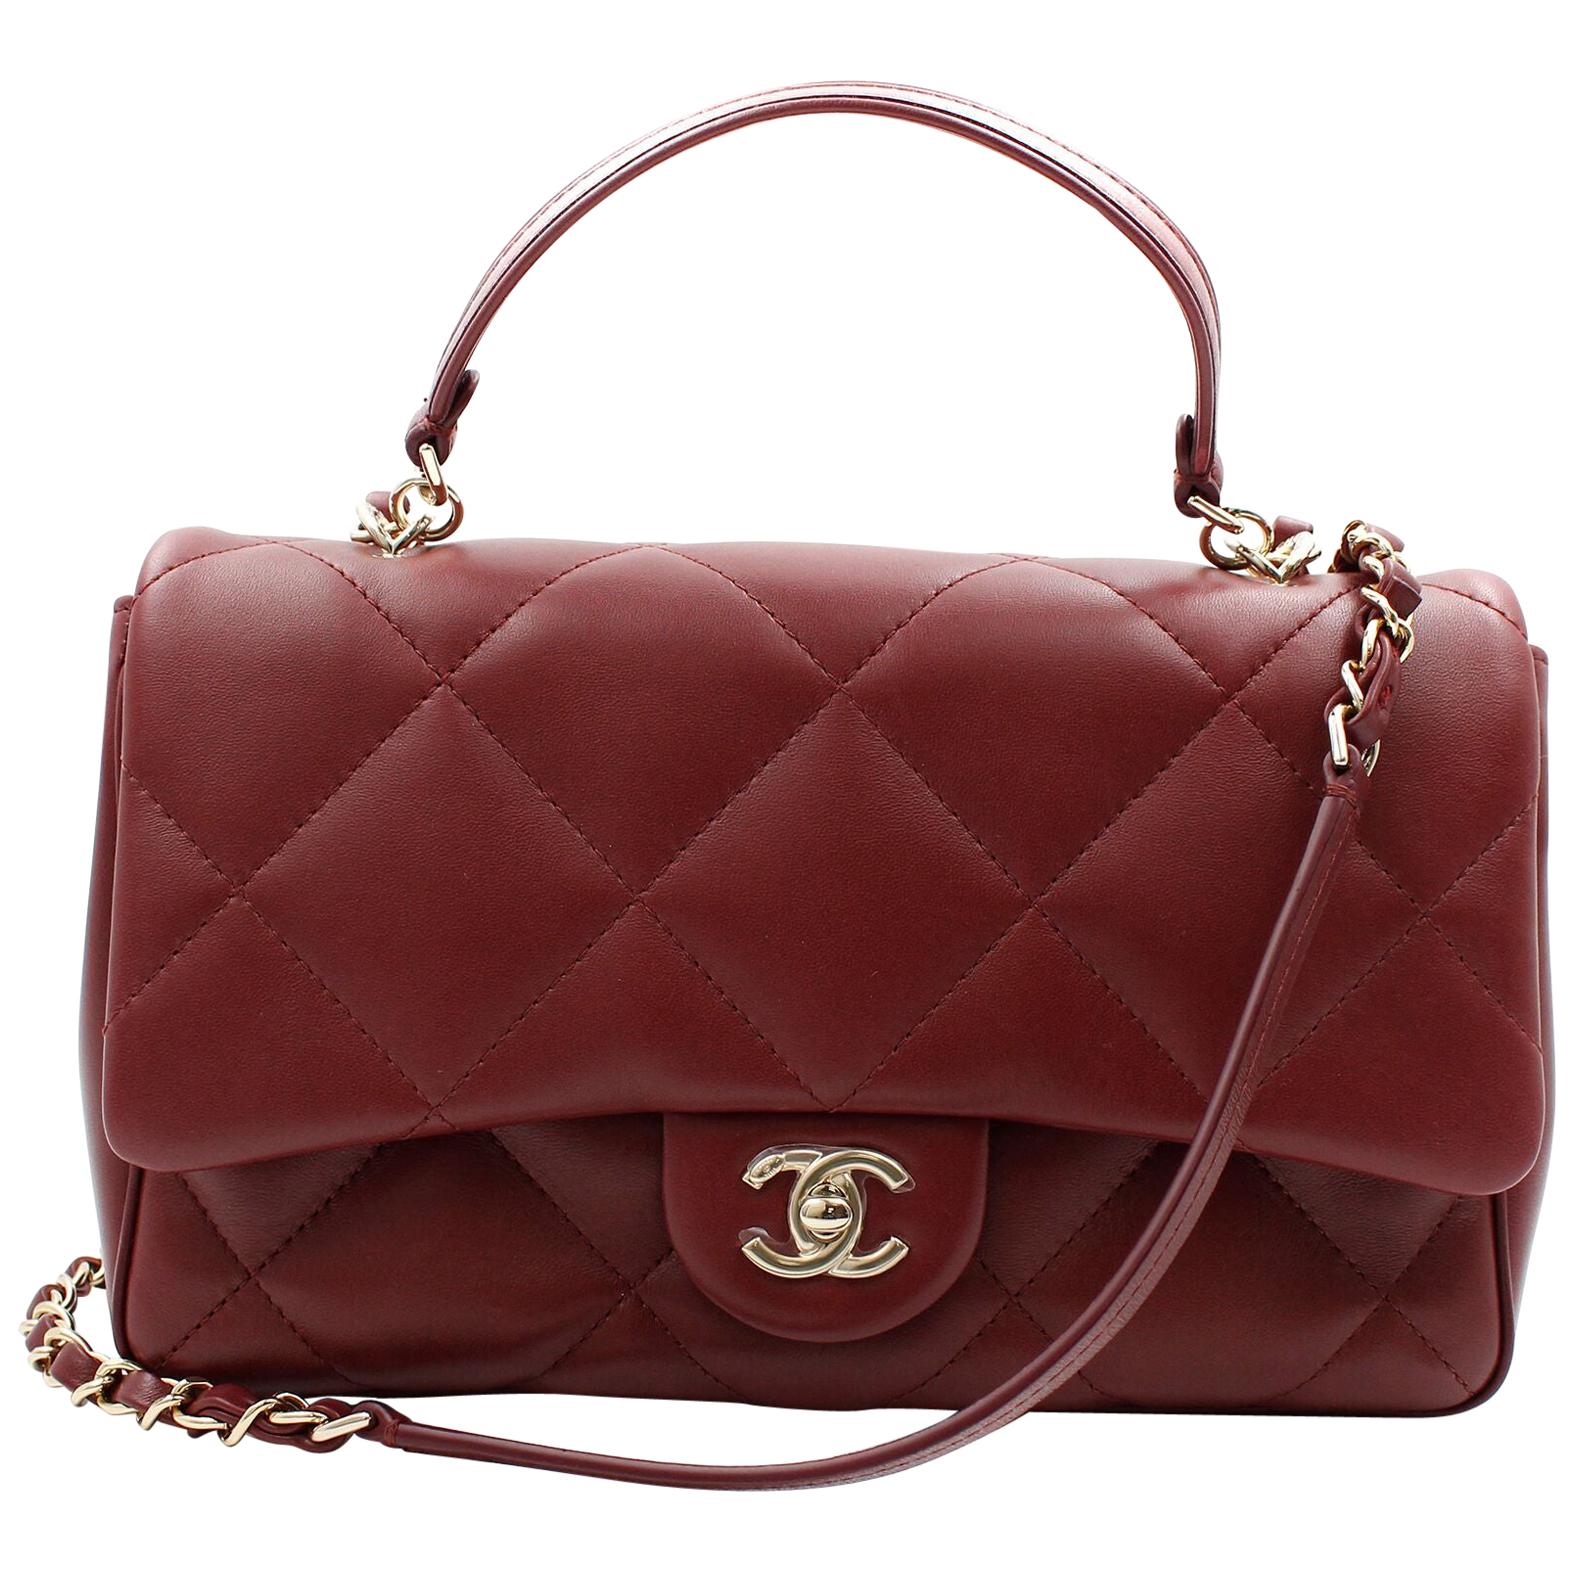 Maroon /Cream Trim Authentic Chanel Shoulder Bag – Finders-Keepers